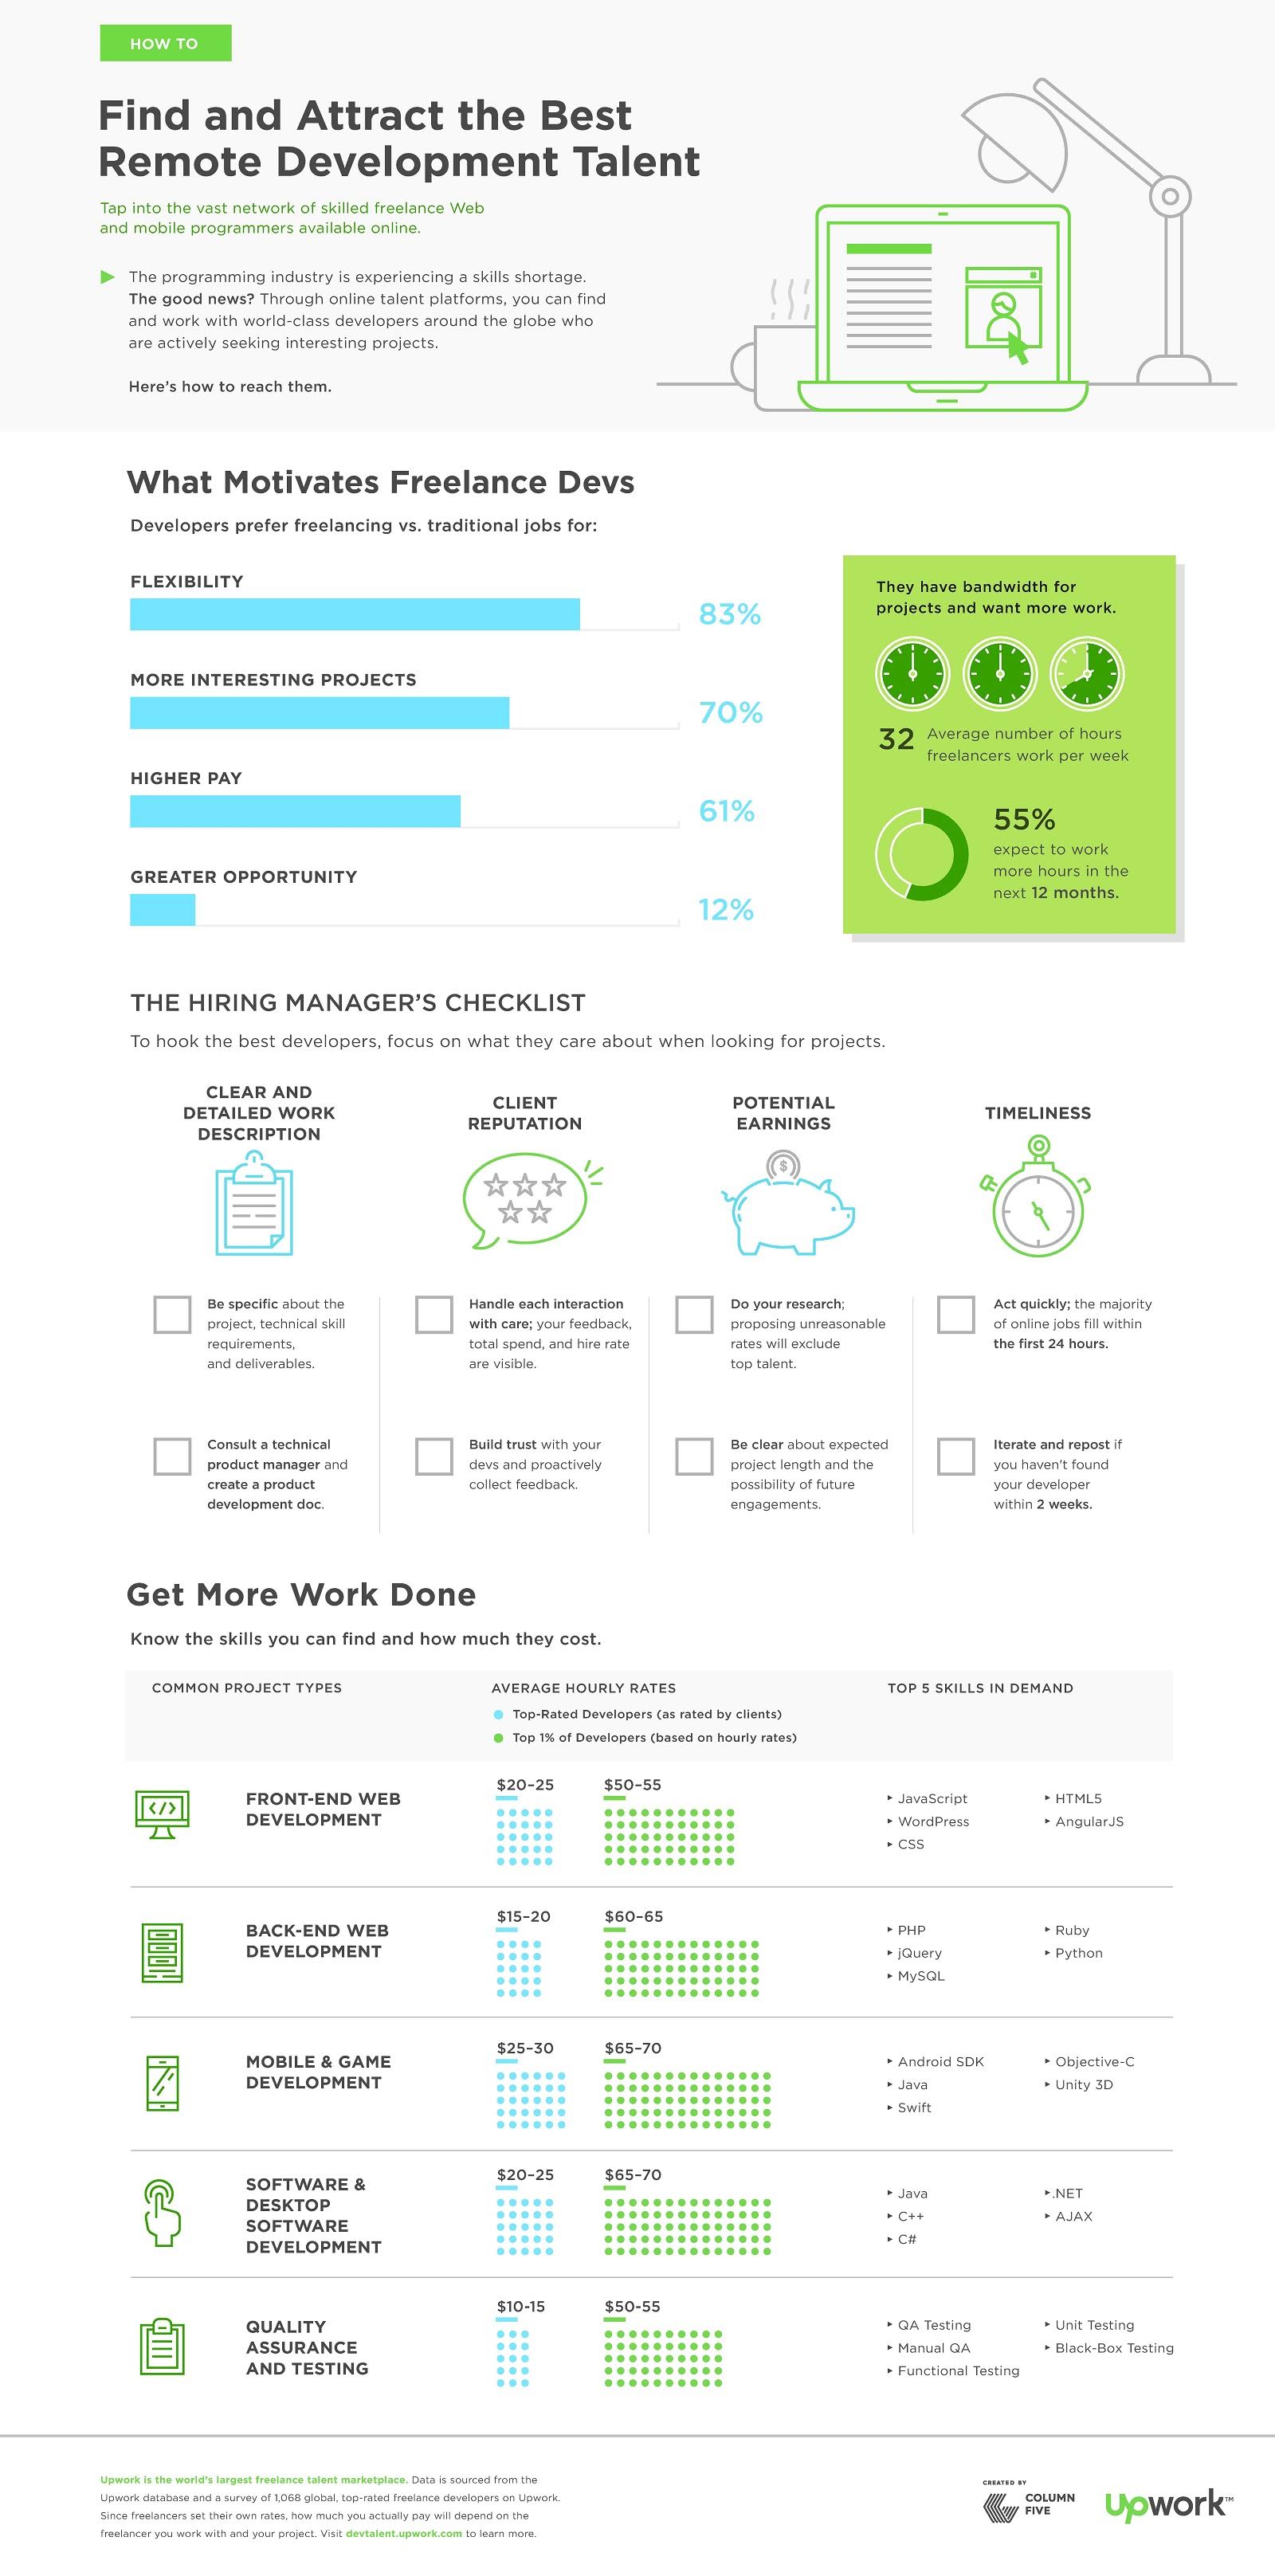 How to Find and Attract the Best Remote Development Talent #infographic